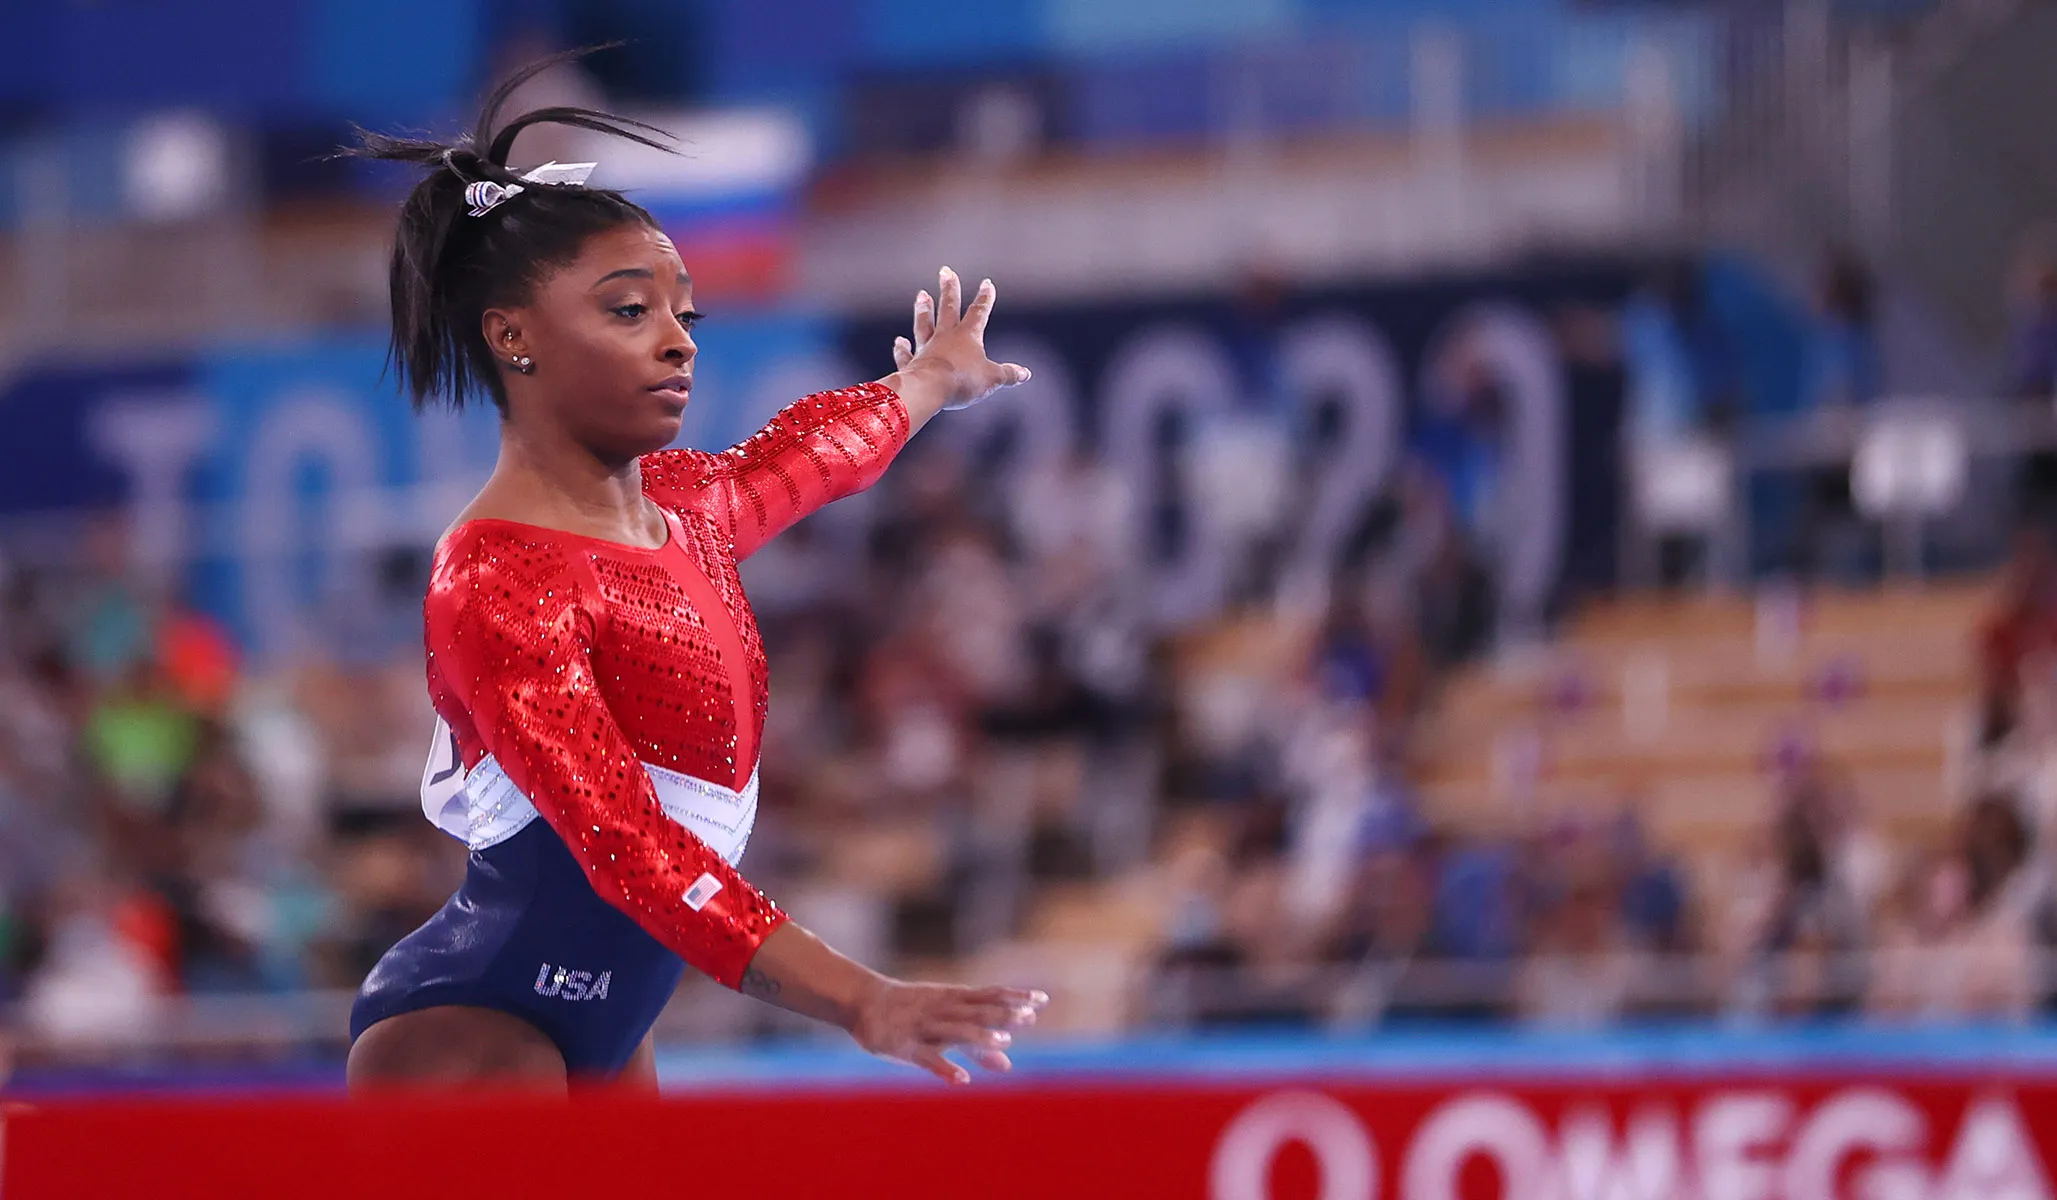 How many Olympic gold medals has Simone Biles won?